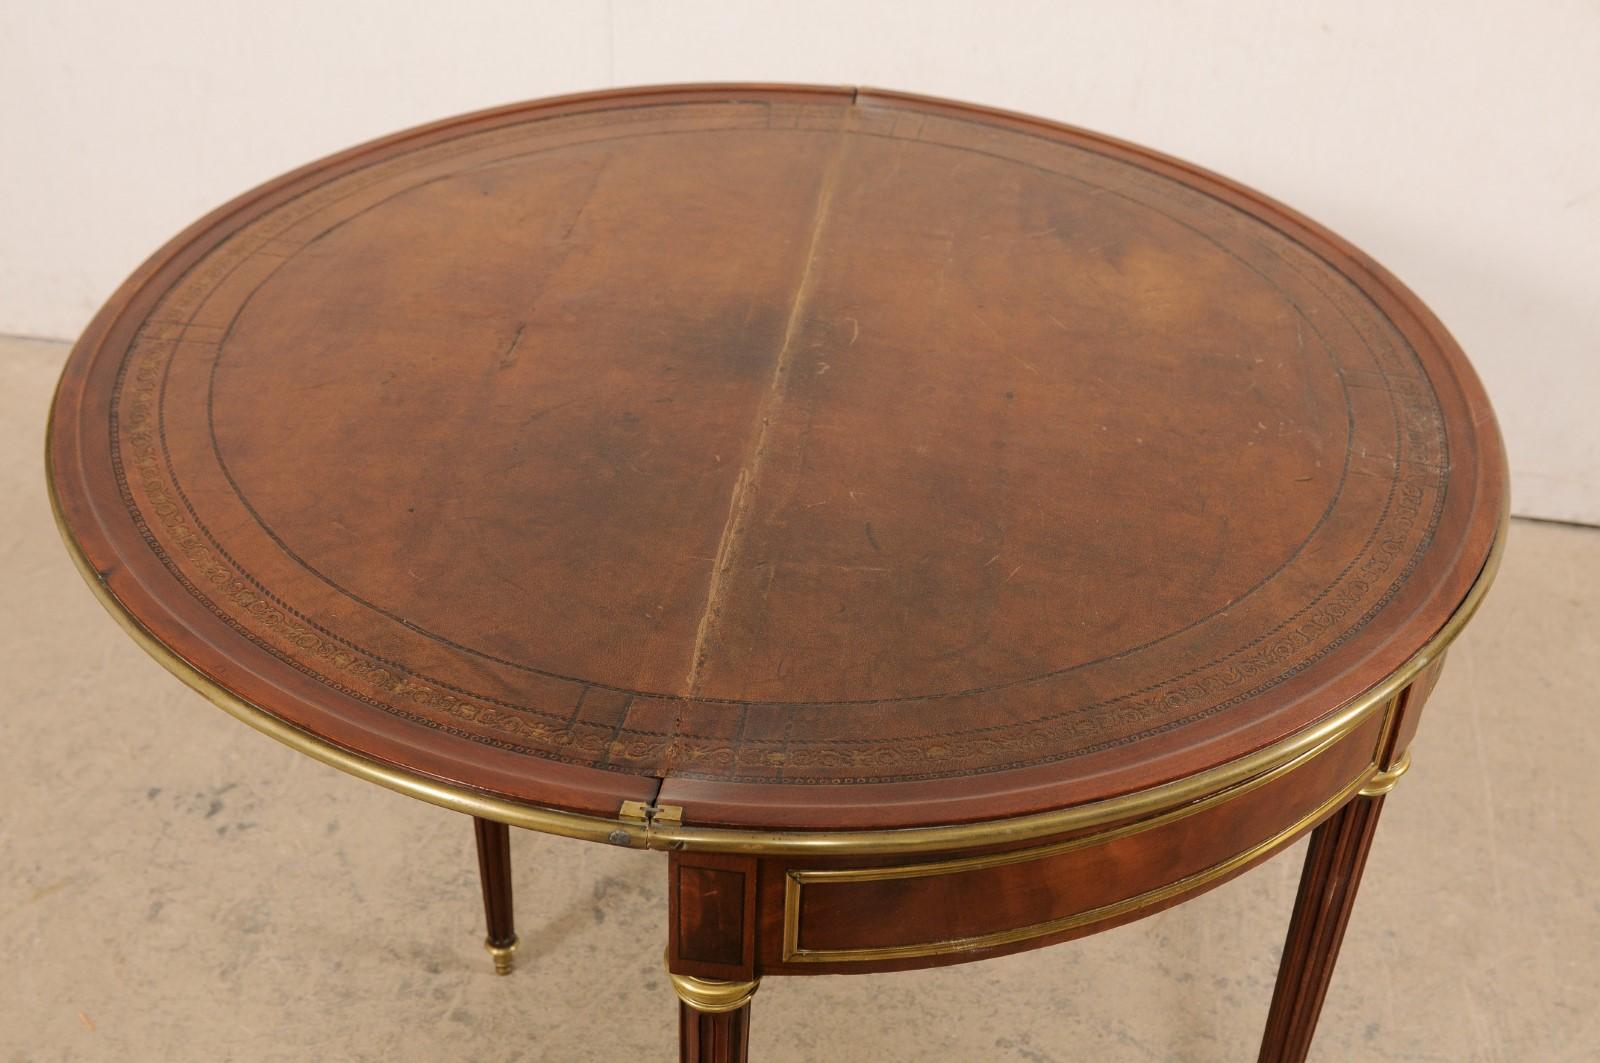  Elegant French Neoclassical Demi-to-round Table W/ Brass Accents, 19th C.  For Sale 6